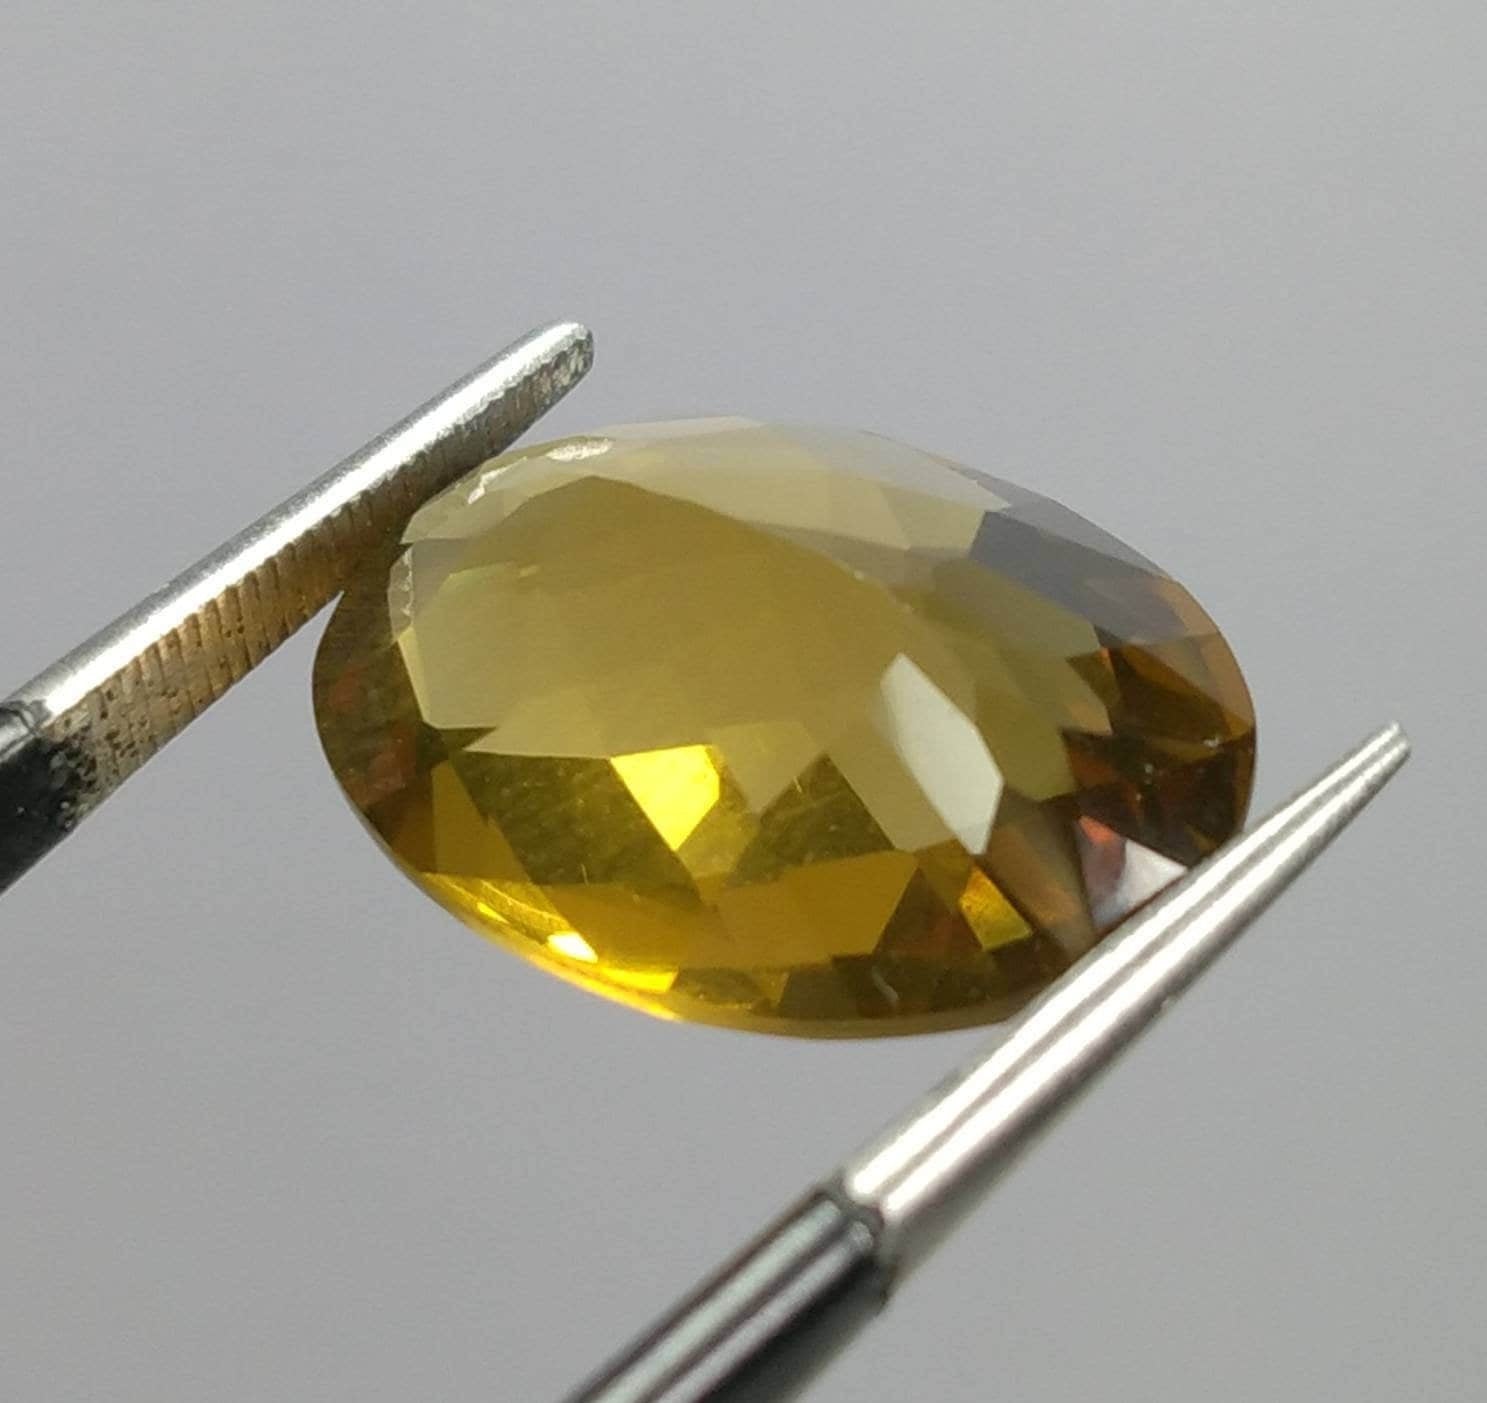 ARSAA GEMS AND MINERALSNatural top quality beautiful 10 carat checkerboard shape faceted citrine gem - Premium  from ARSAA GEMS AND MINERALS - Just $30.00! Shop now at ARSAA GEMS AND MINERALS